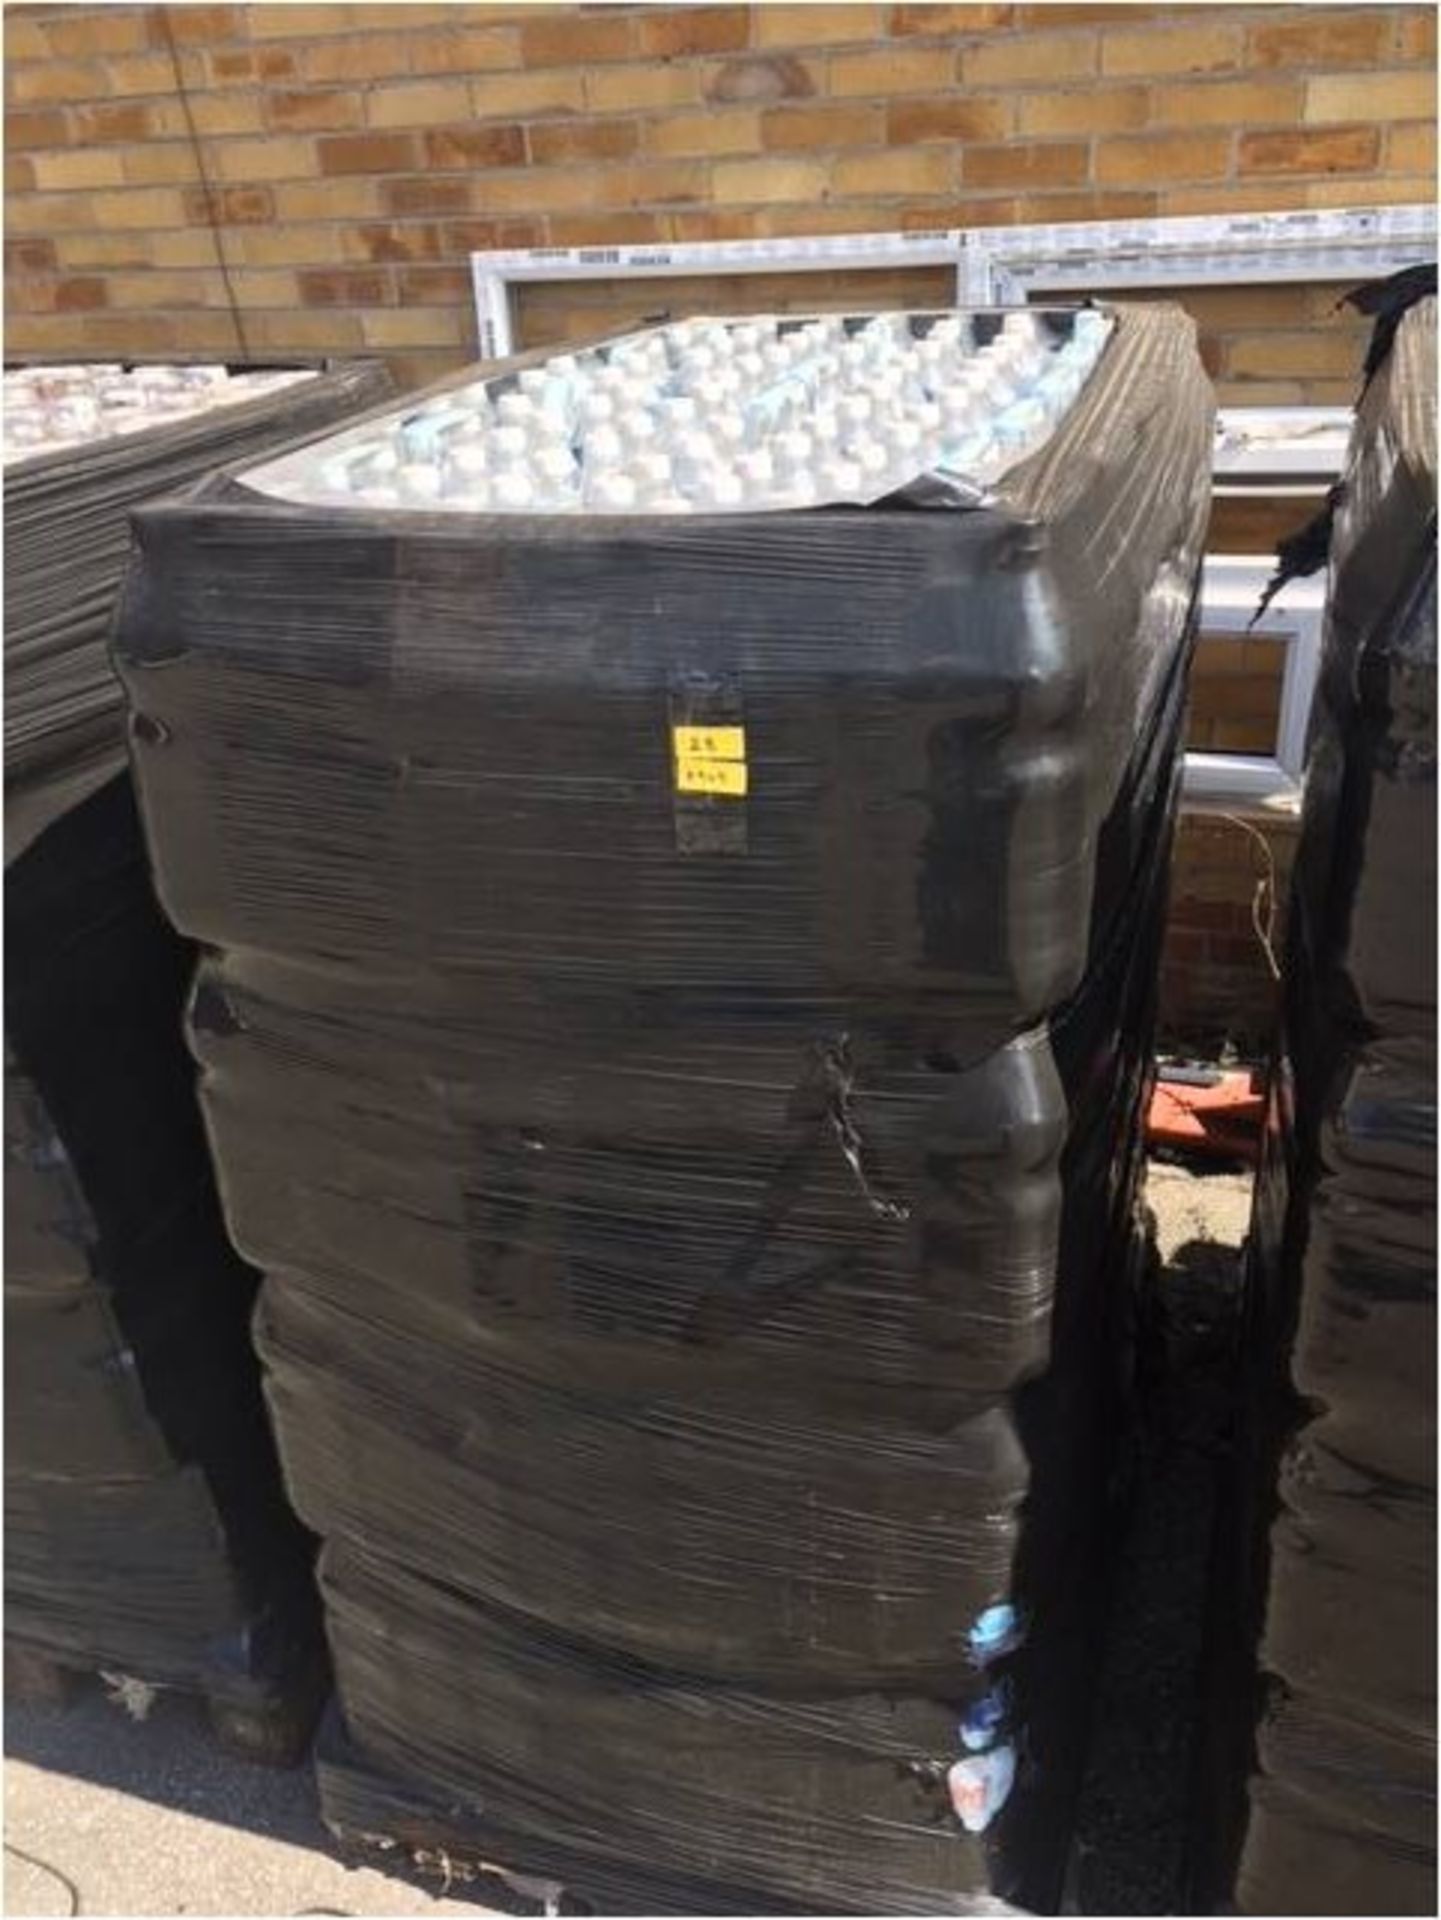 Pallet Containing Bottles of Mineral Water